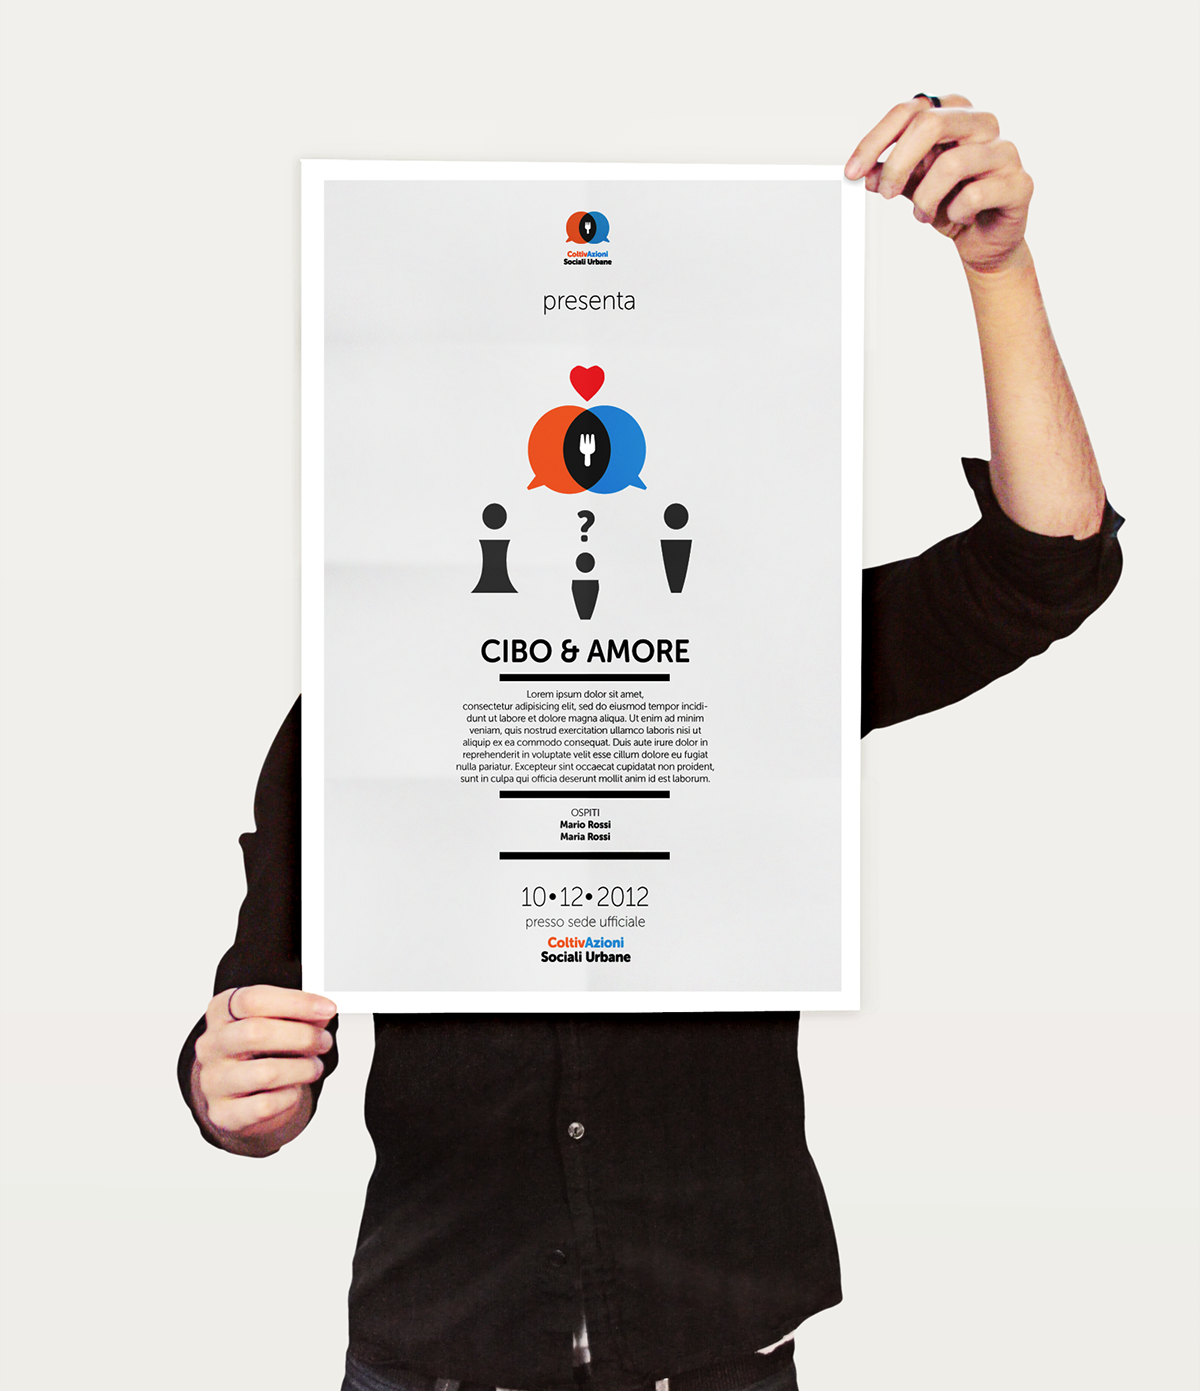 milan propose official Competition personal Project paolo bischi graphics blue red september identity brand